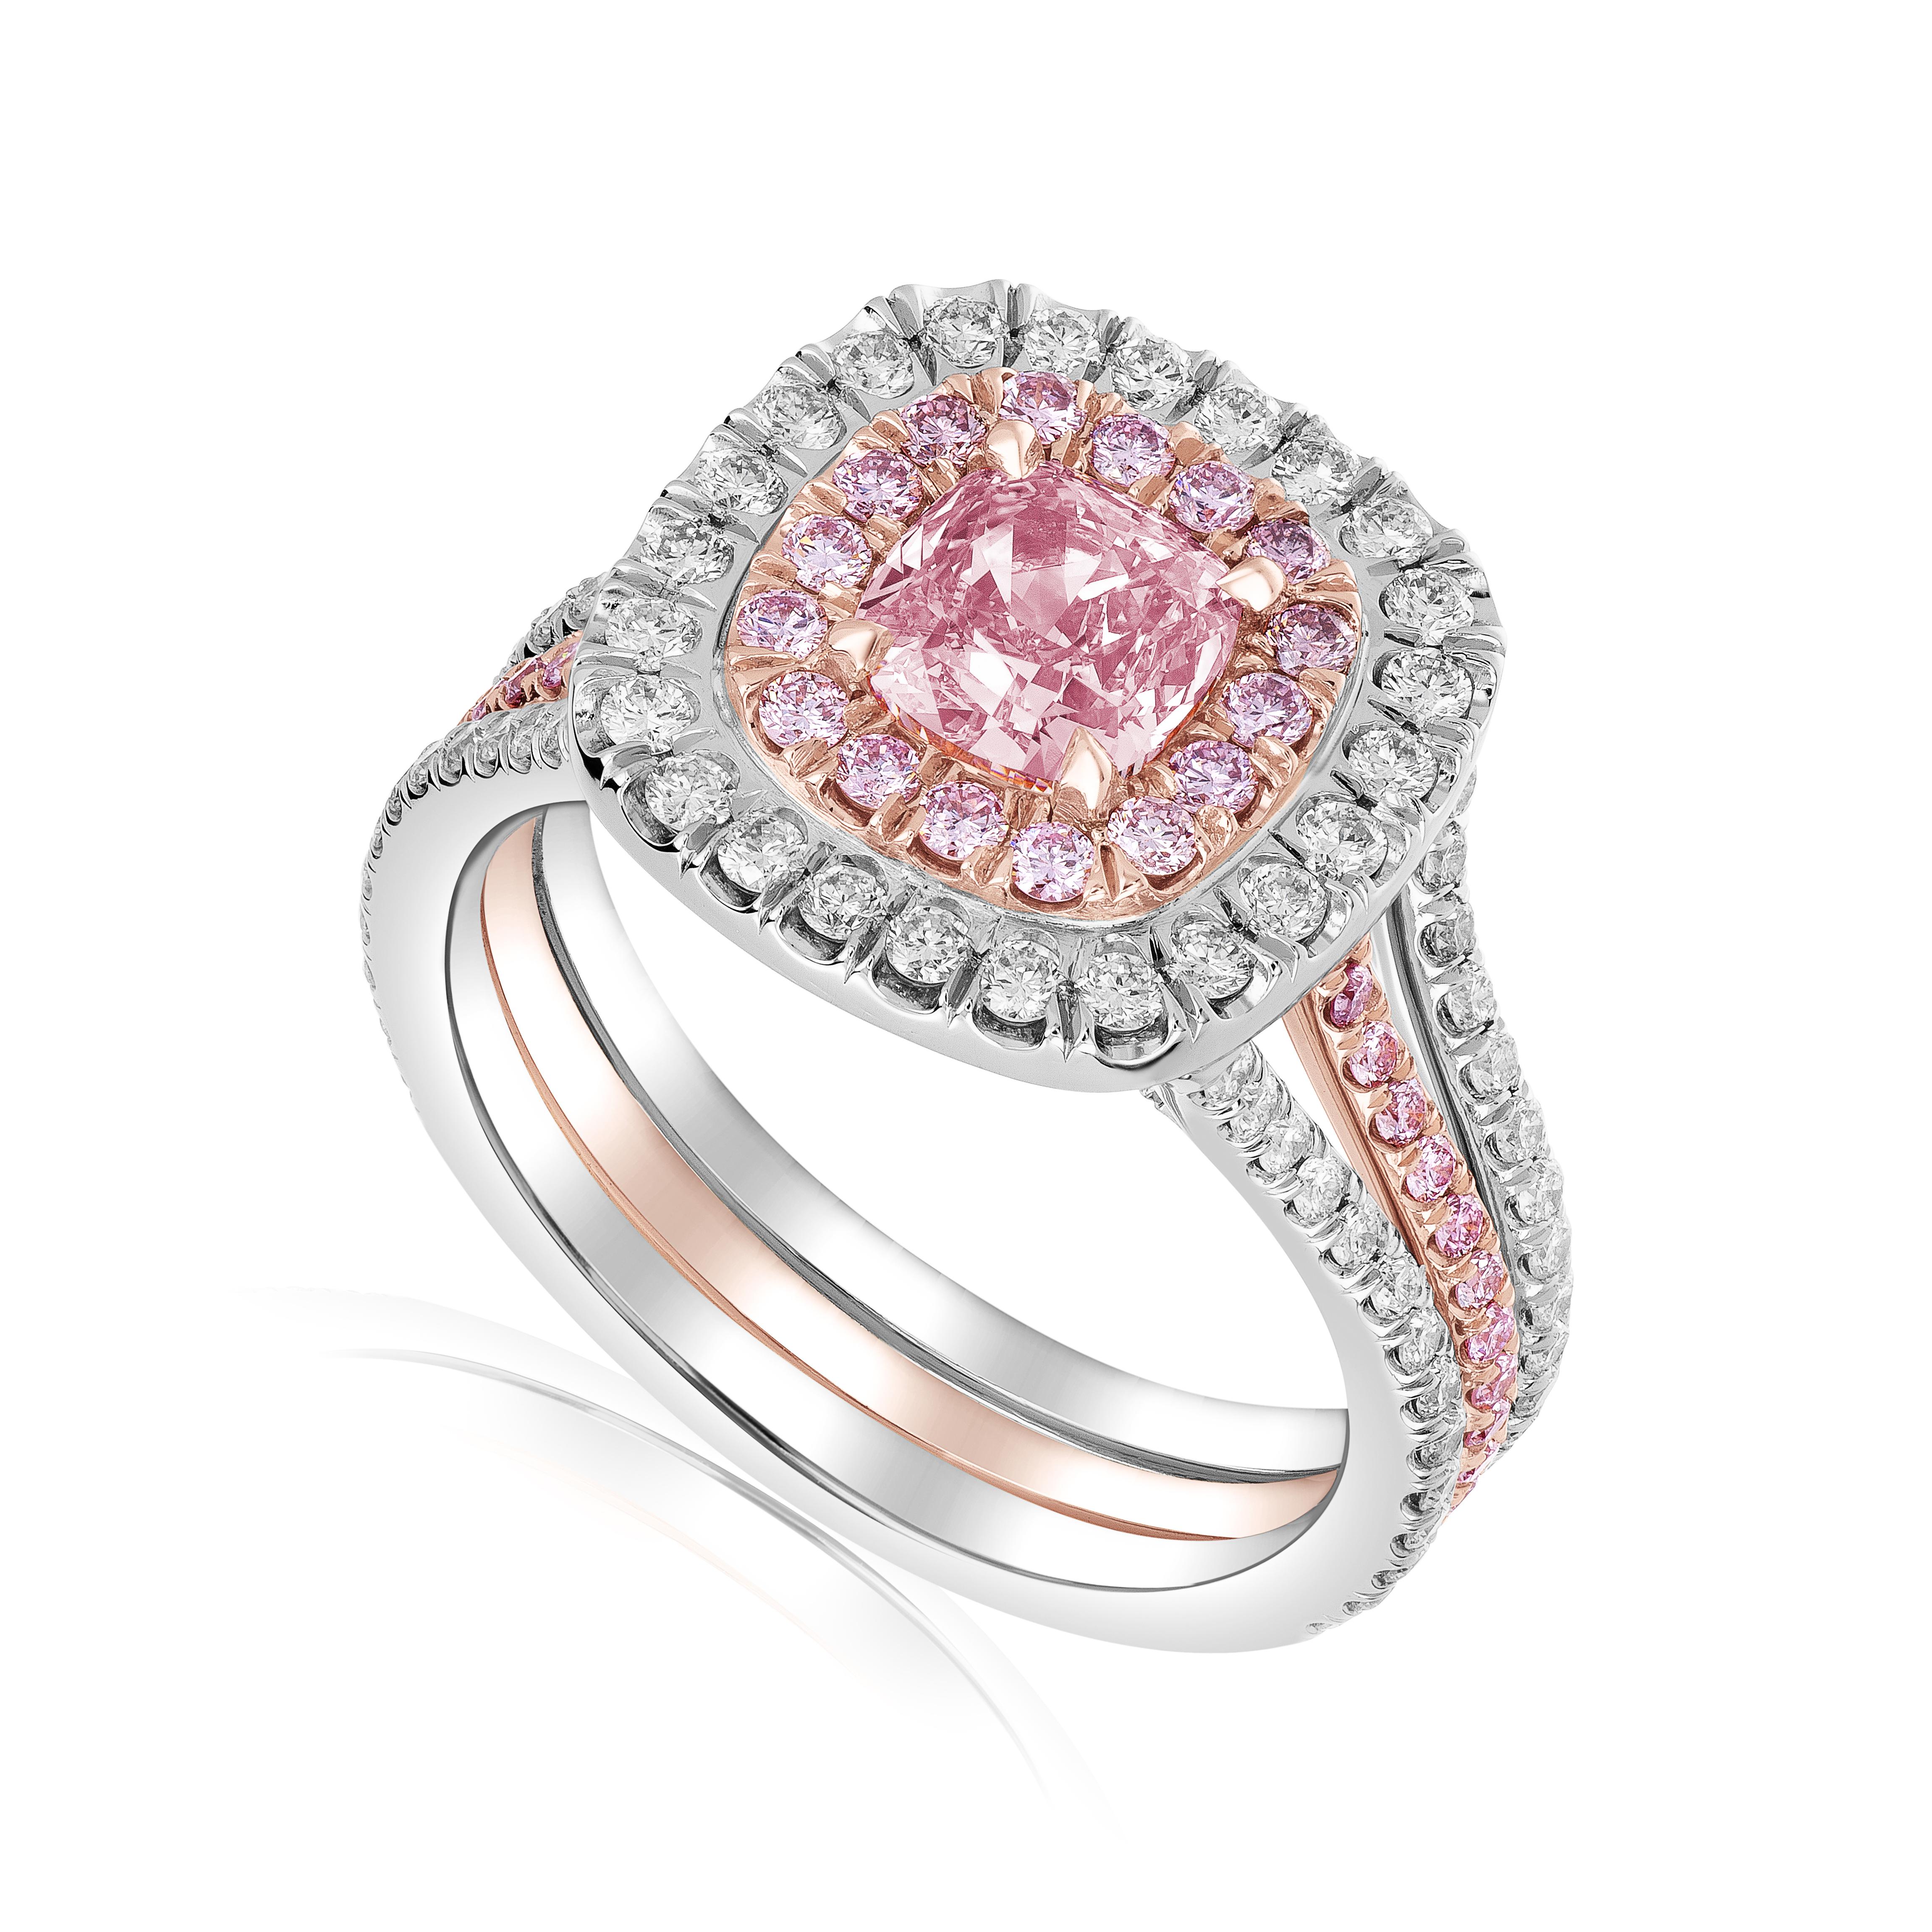 Contemporary GIA Certified 0.75 SI1 Fancy Pink Cushion Diamond Double Halo Ring